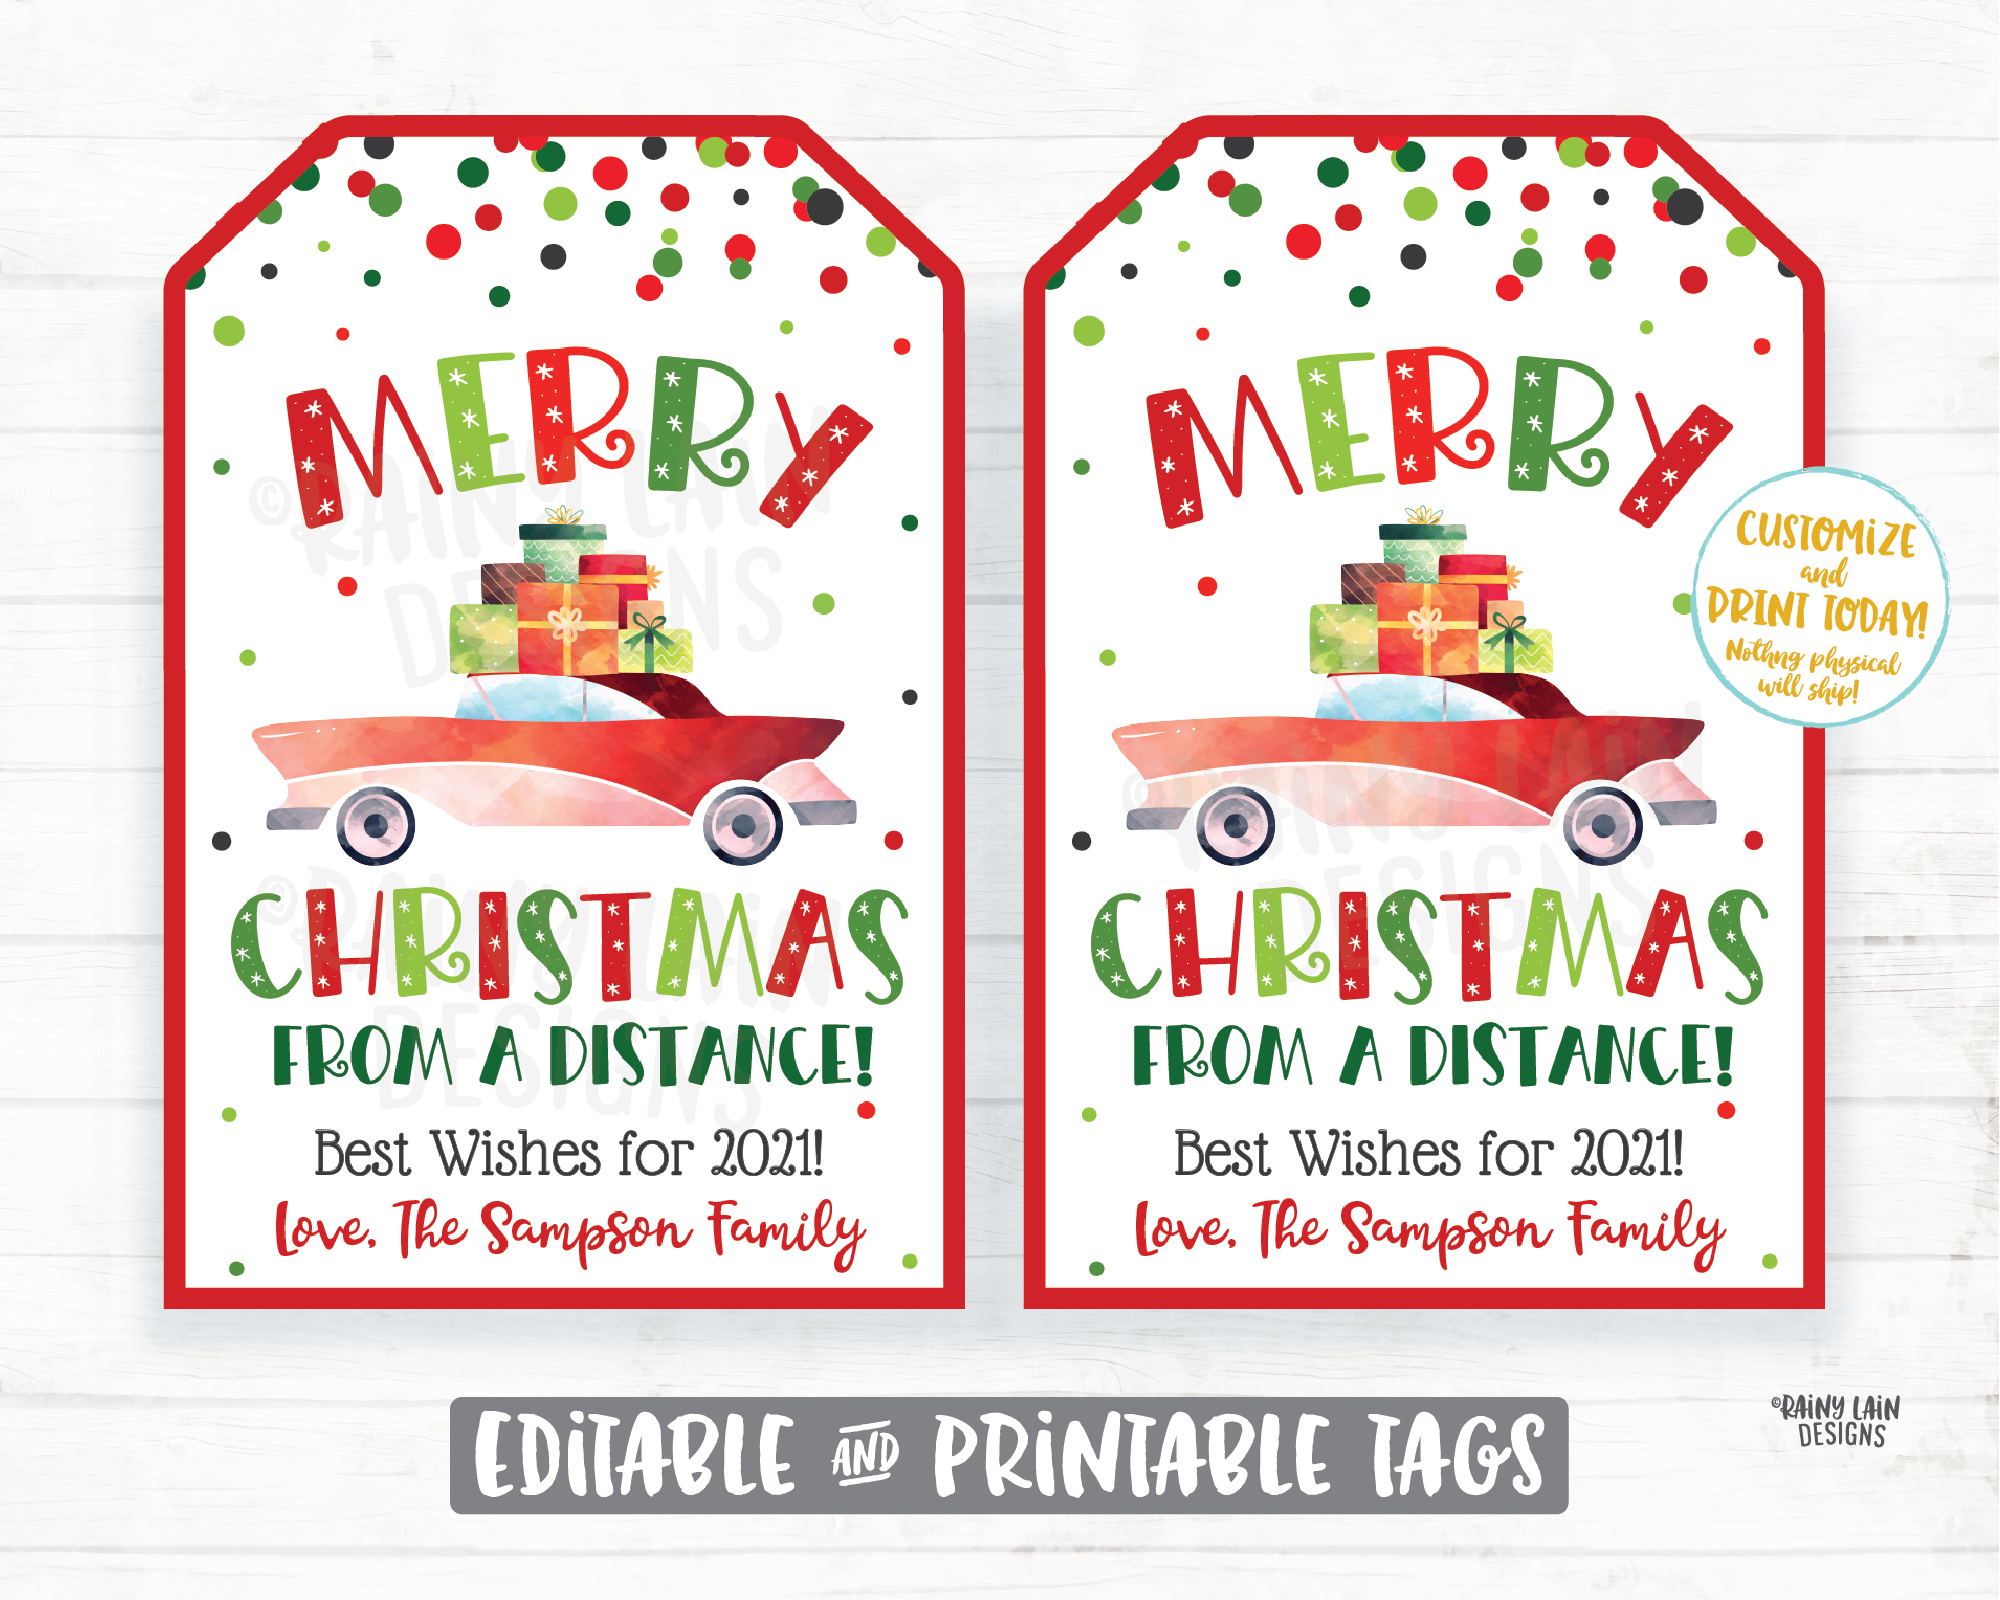 Merry Christmas From A Distance Tags Printable Christmas Tags Editable Holiday Gift Tags Christmas Mask Tags 2020 Social Distancing Pandemic